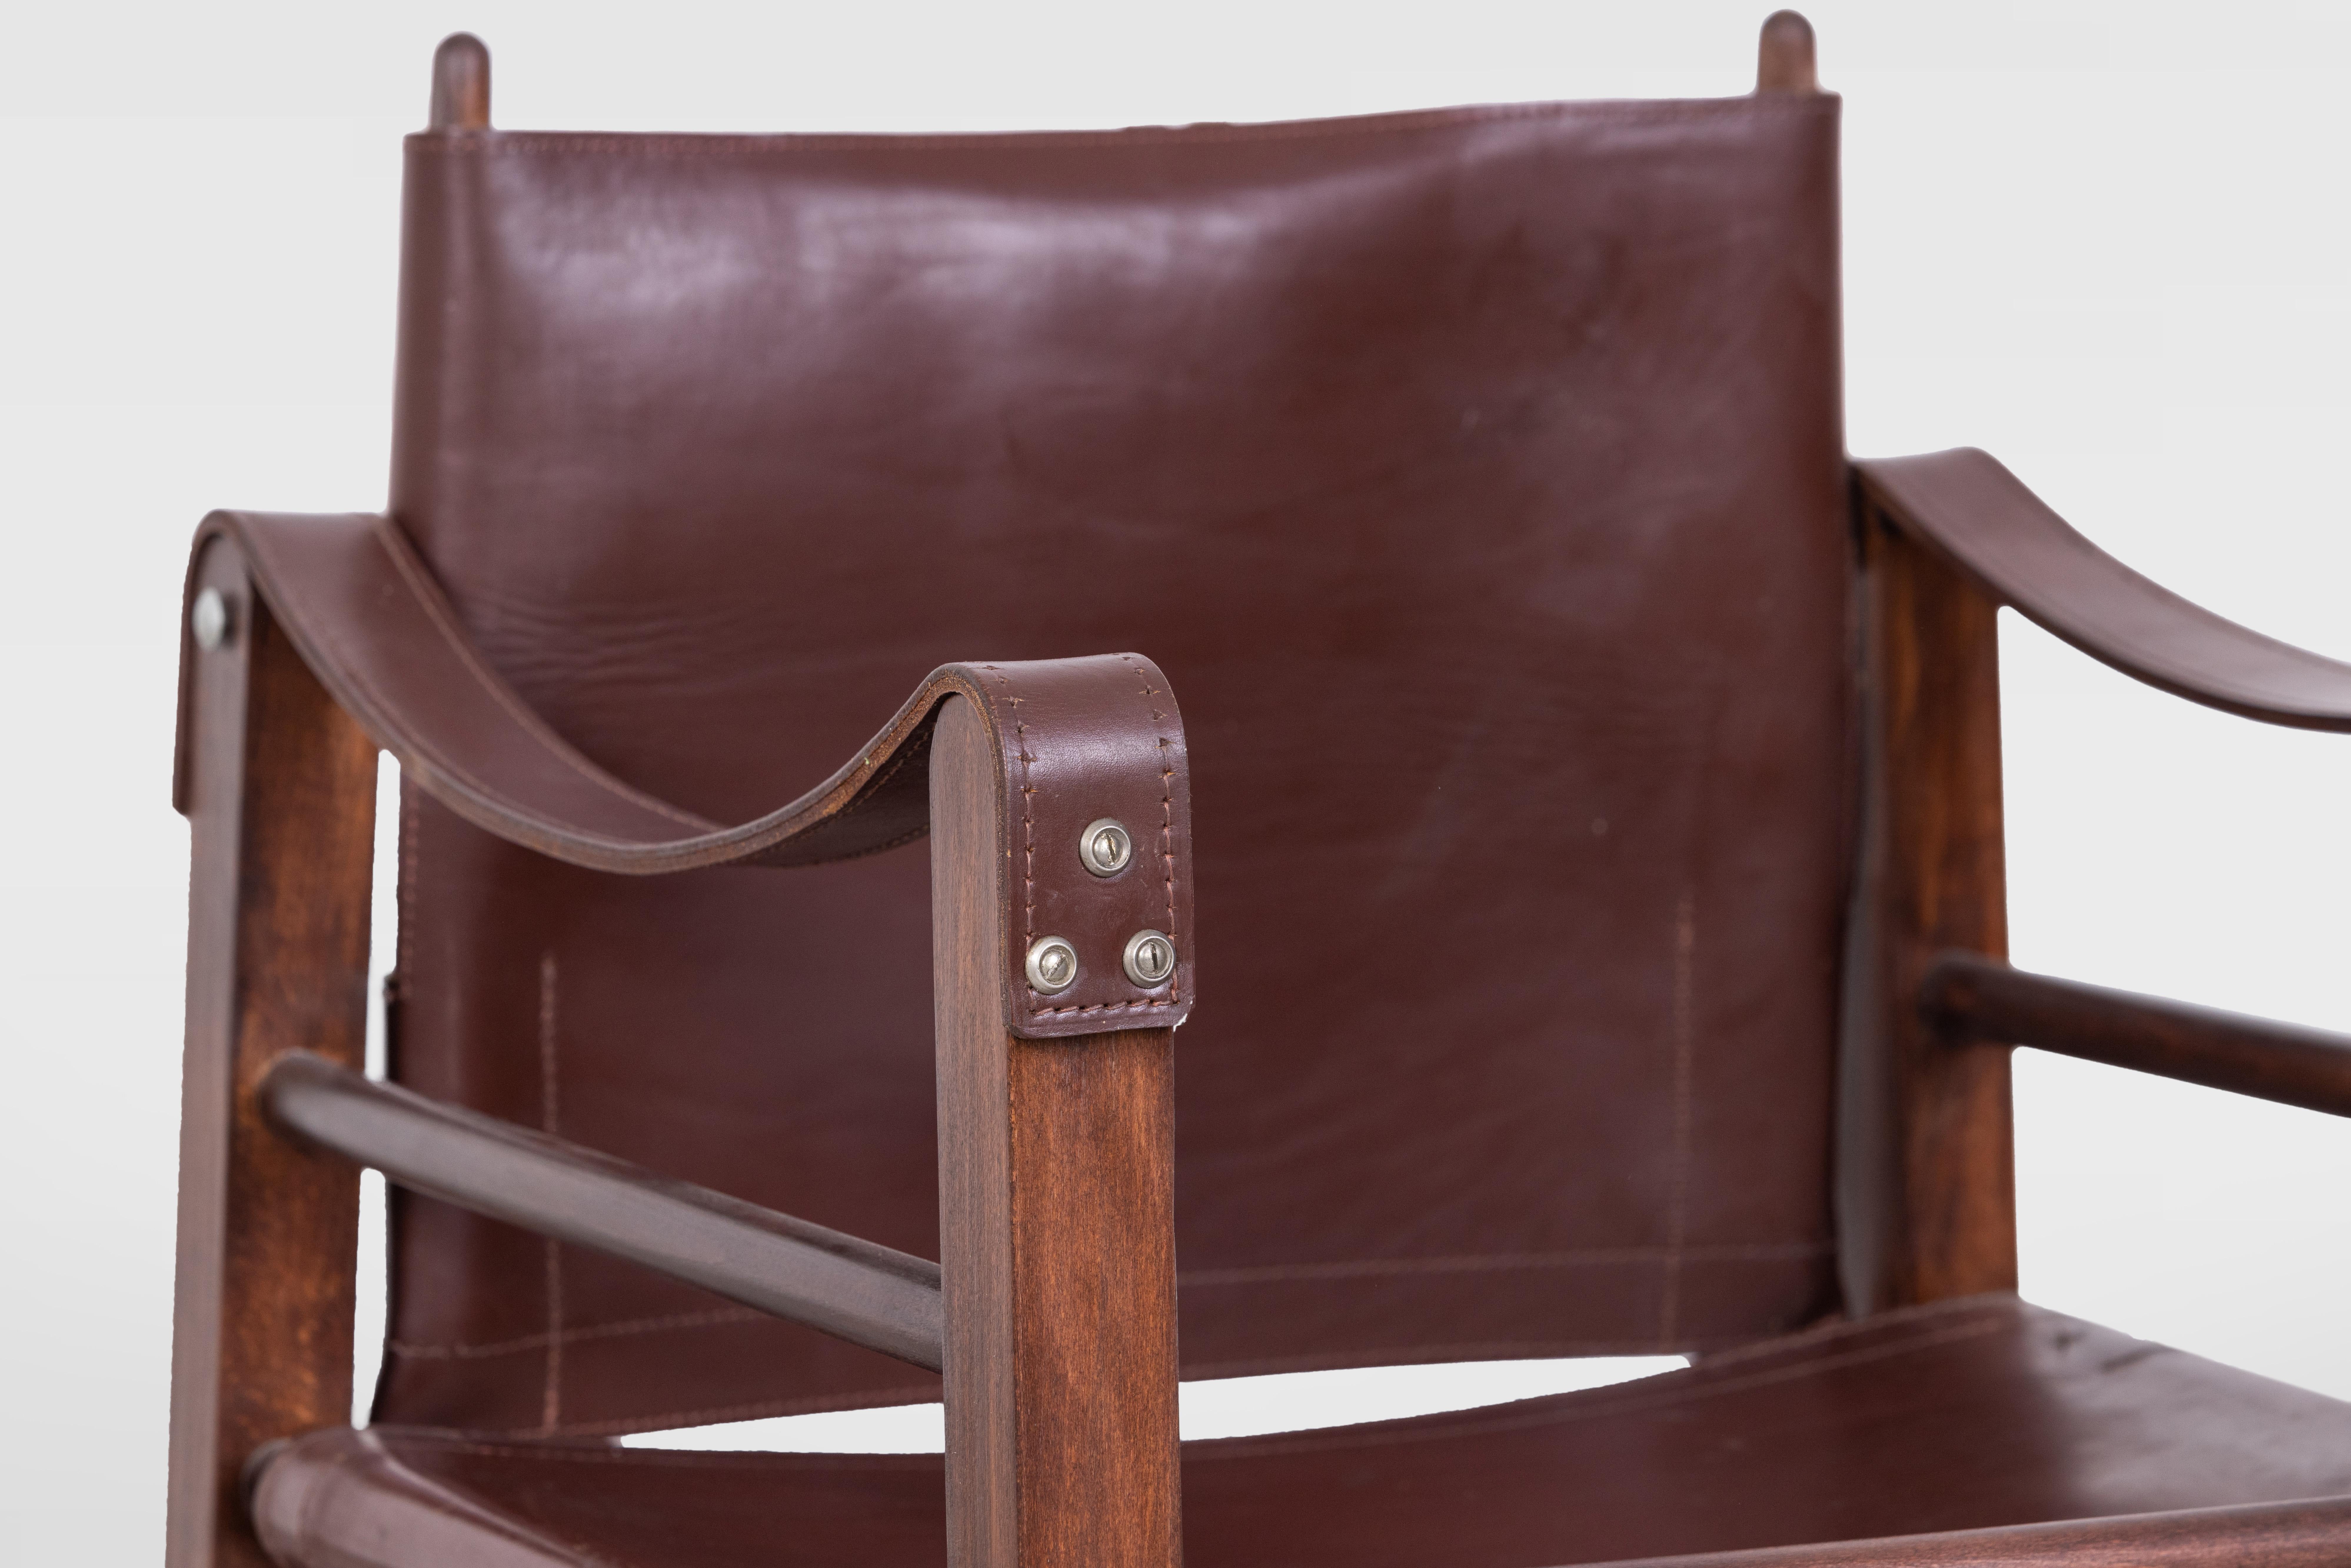 Danish mid-century Aage Bruun & Son Safary chair in patinated brown leather and solid oak. The oak structure has been restored, the leather has been kept the original with a nice patina.